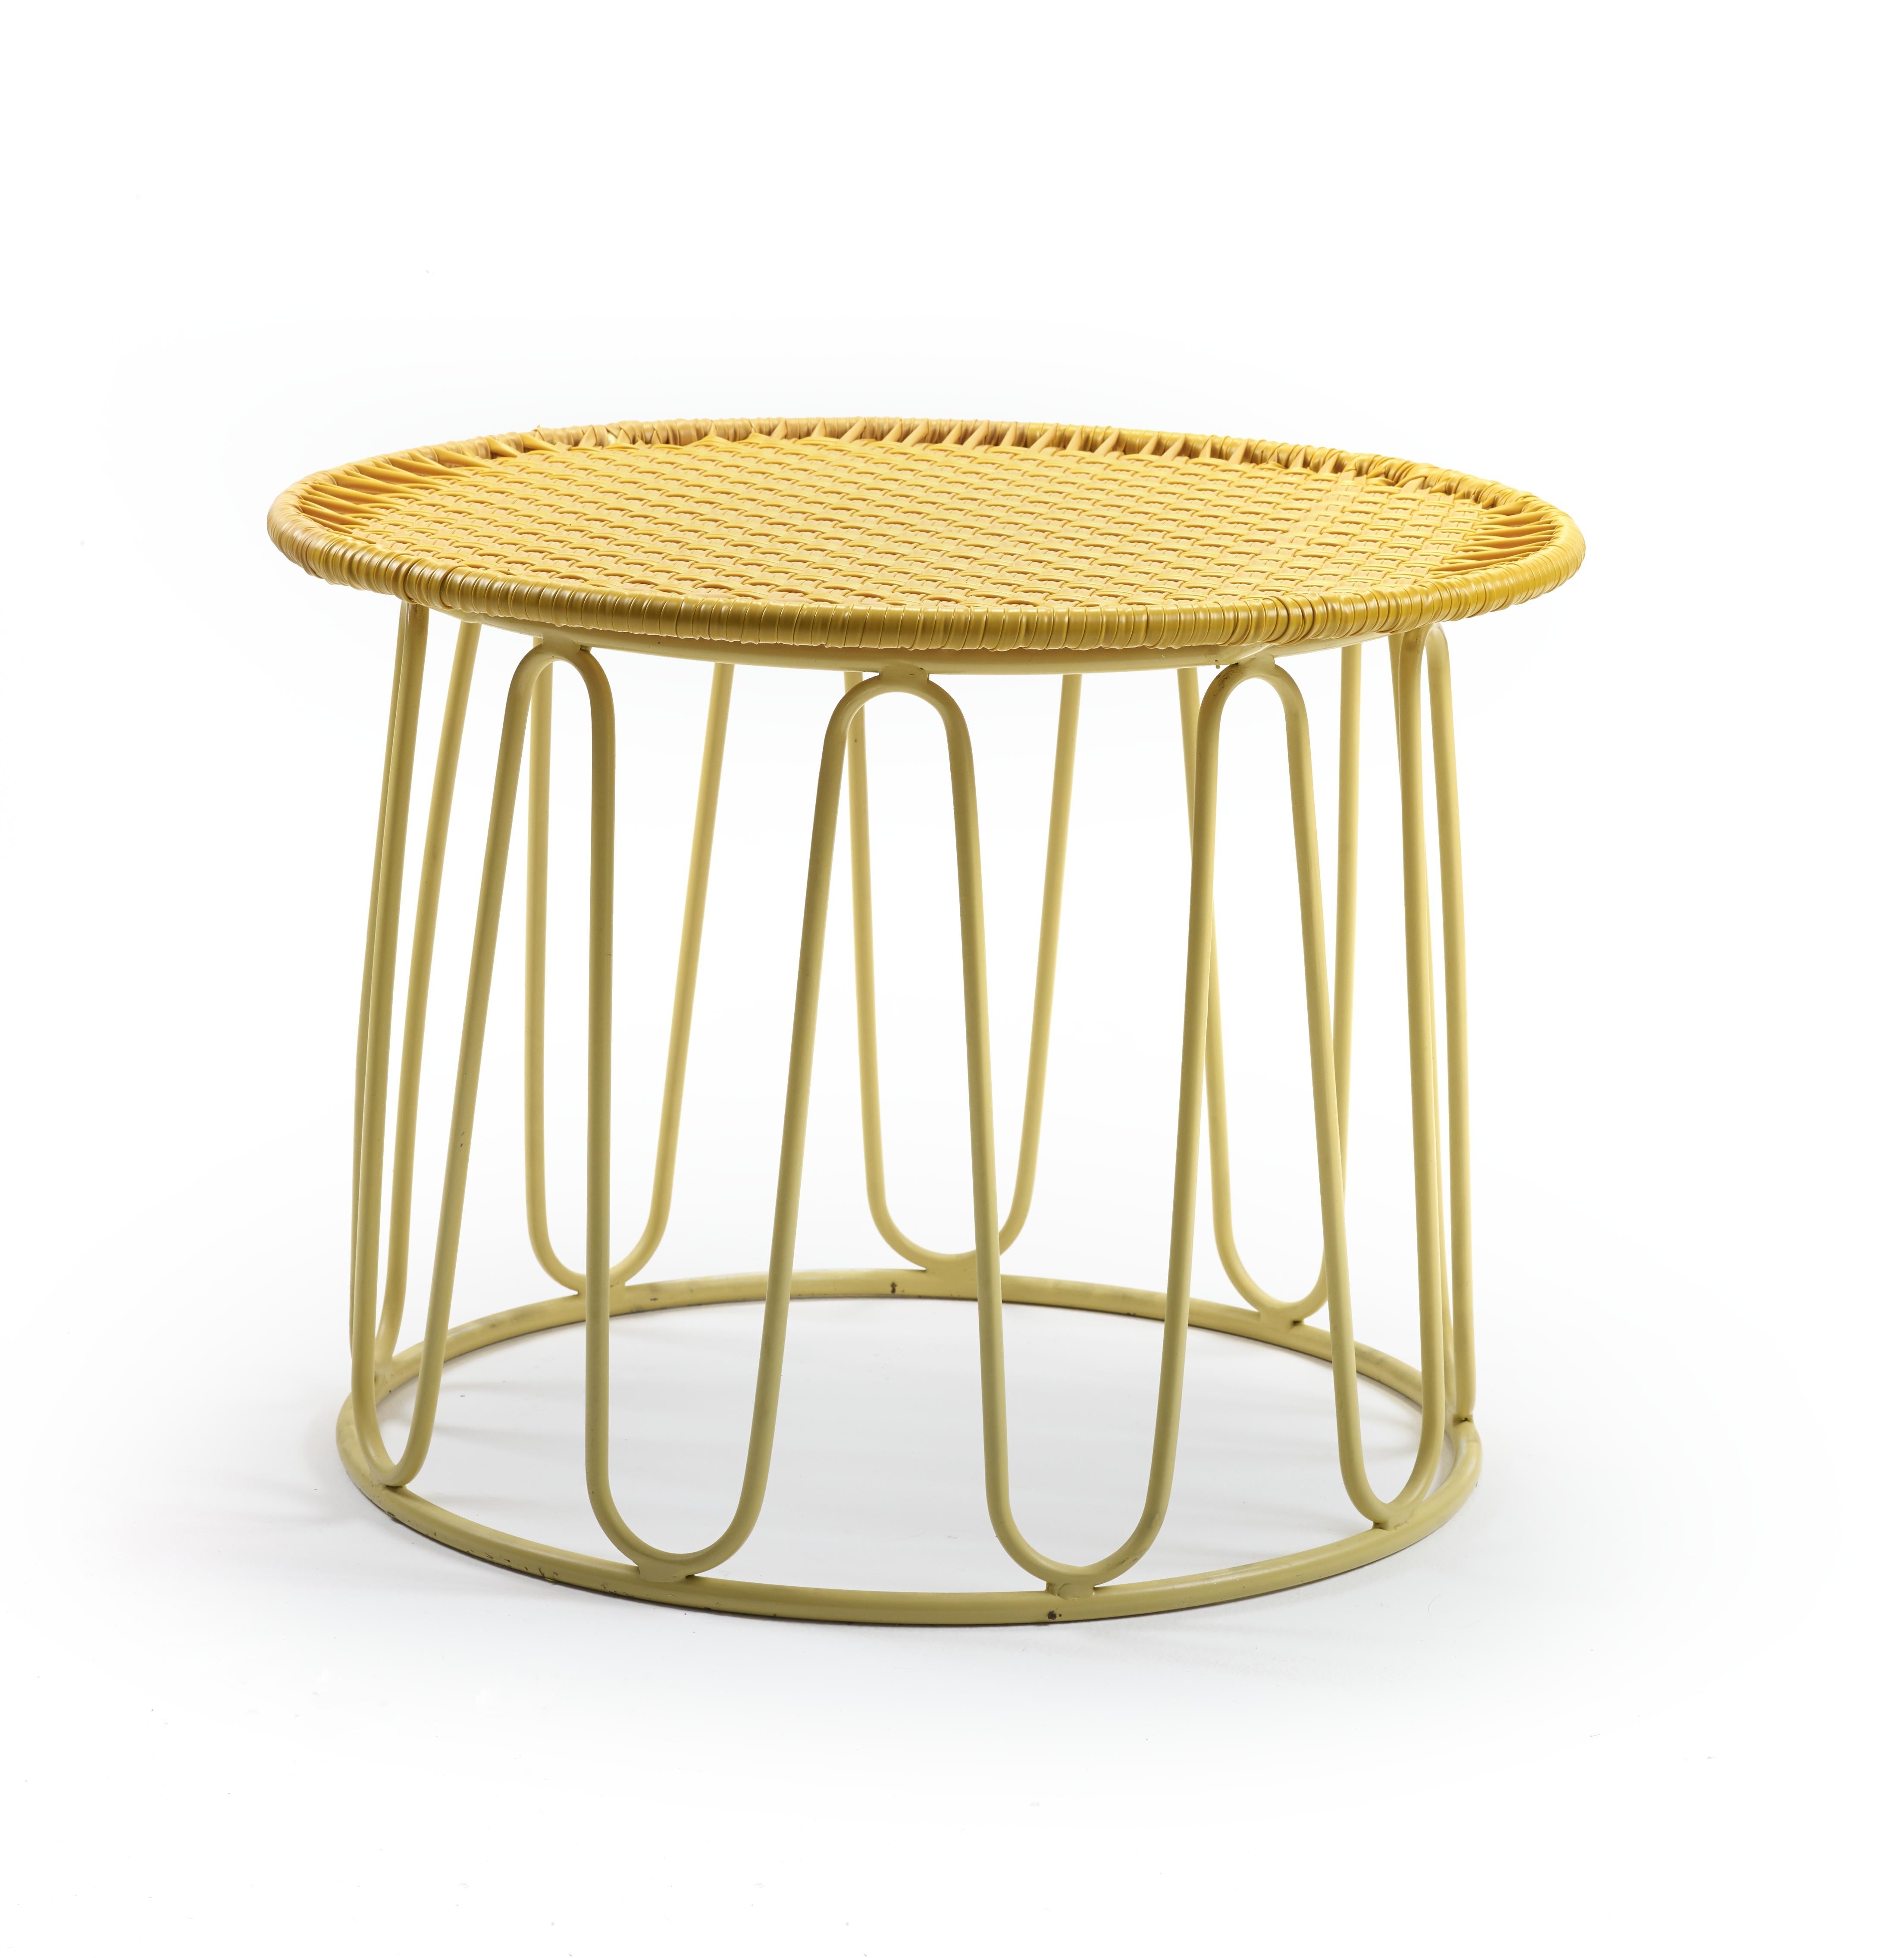 Honey Circo side table by Sebastian Herkner
Materials: galvanized and powder-coated tubular steel. PVC strings.
Technique: Made from recycled plastic. Weaved by local craftspeople in Colombia. 
Dimensions: 
Top diameter 55 cm 
Base diameter 51